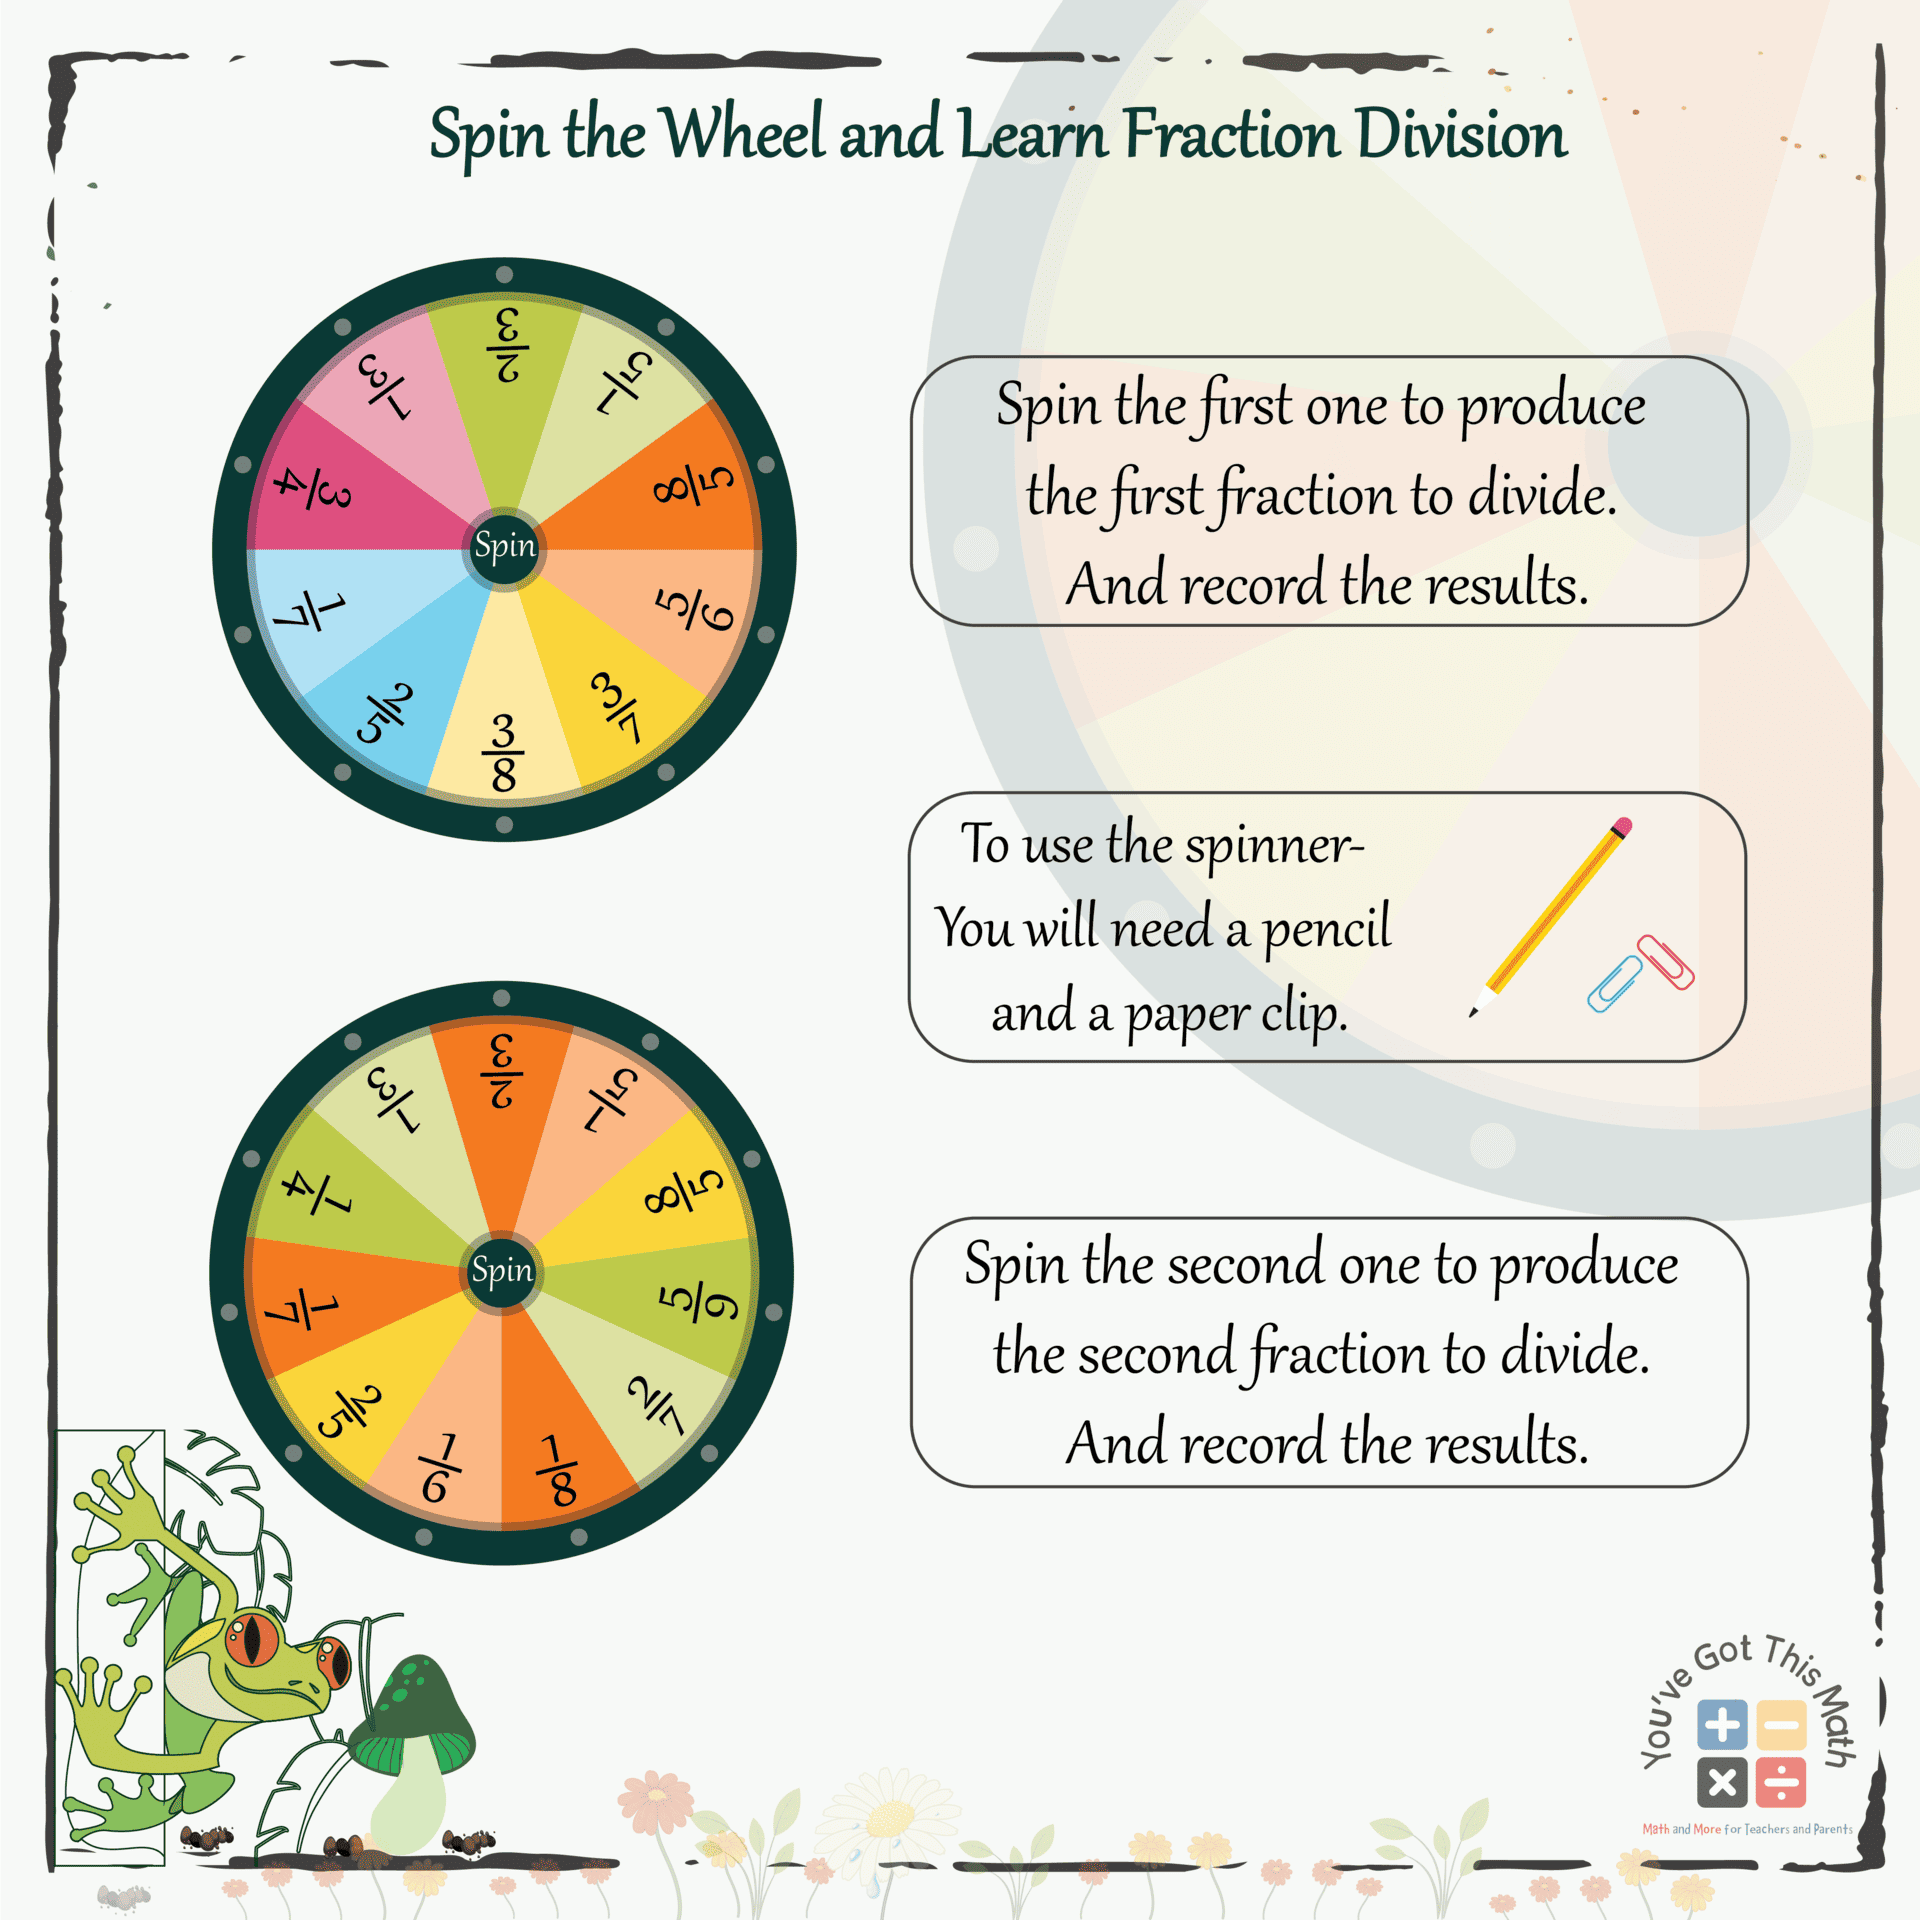 Spin the Wheel and Learn Fraction Division